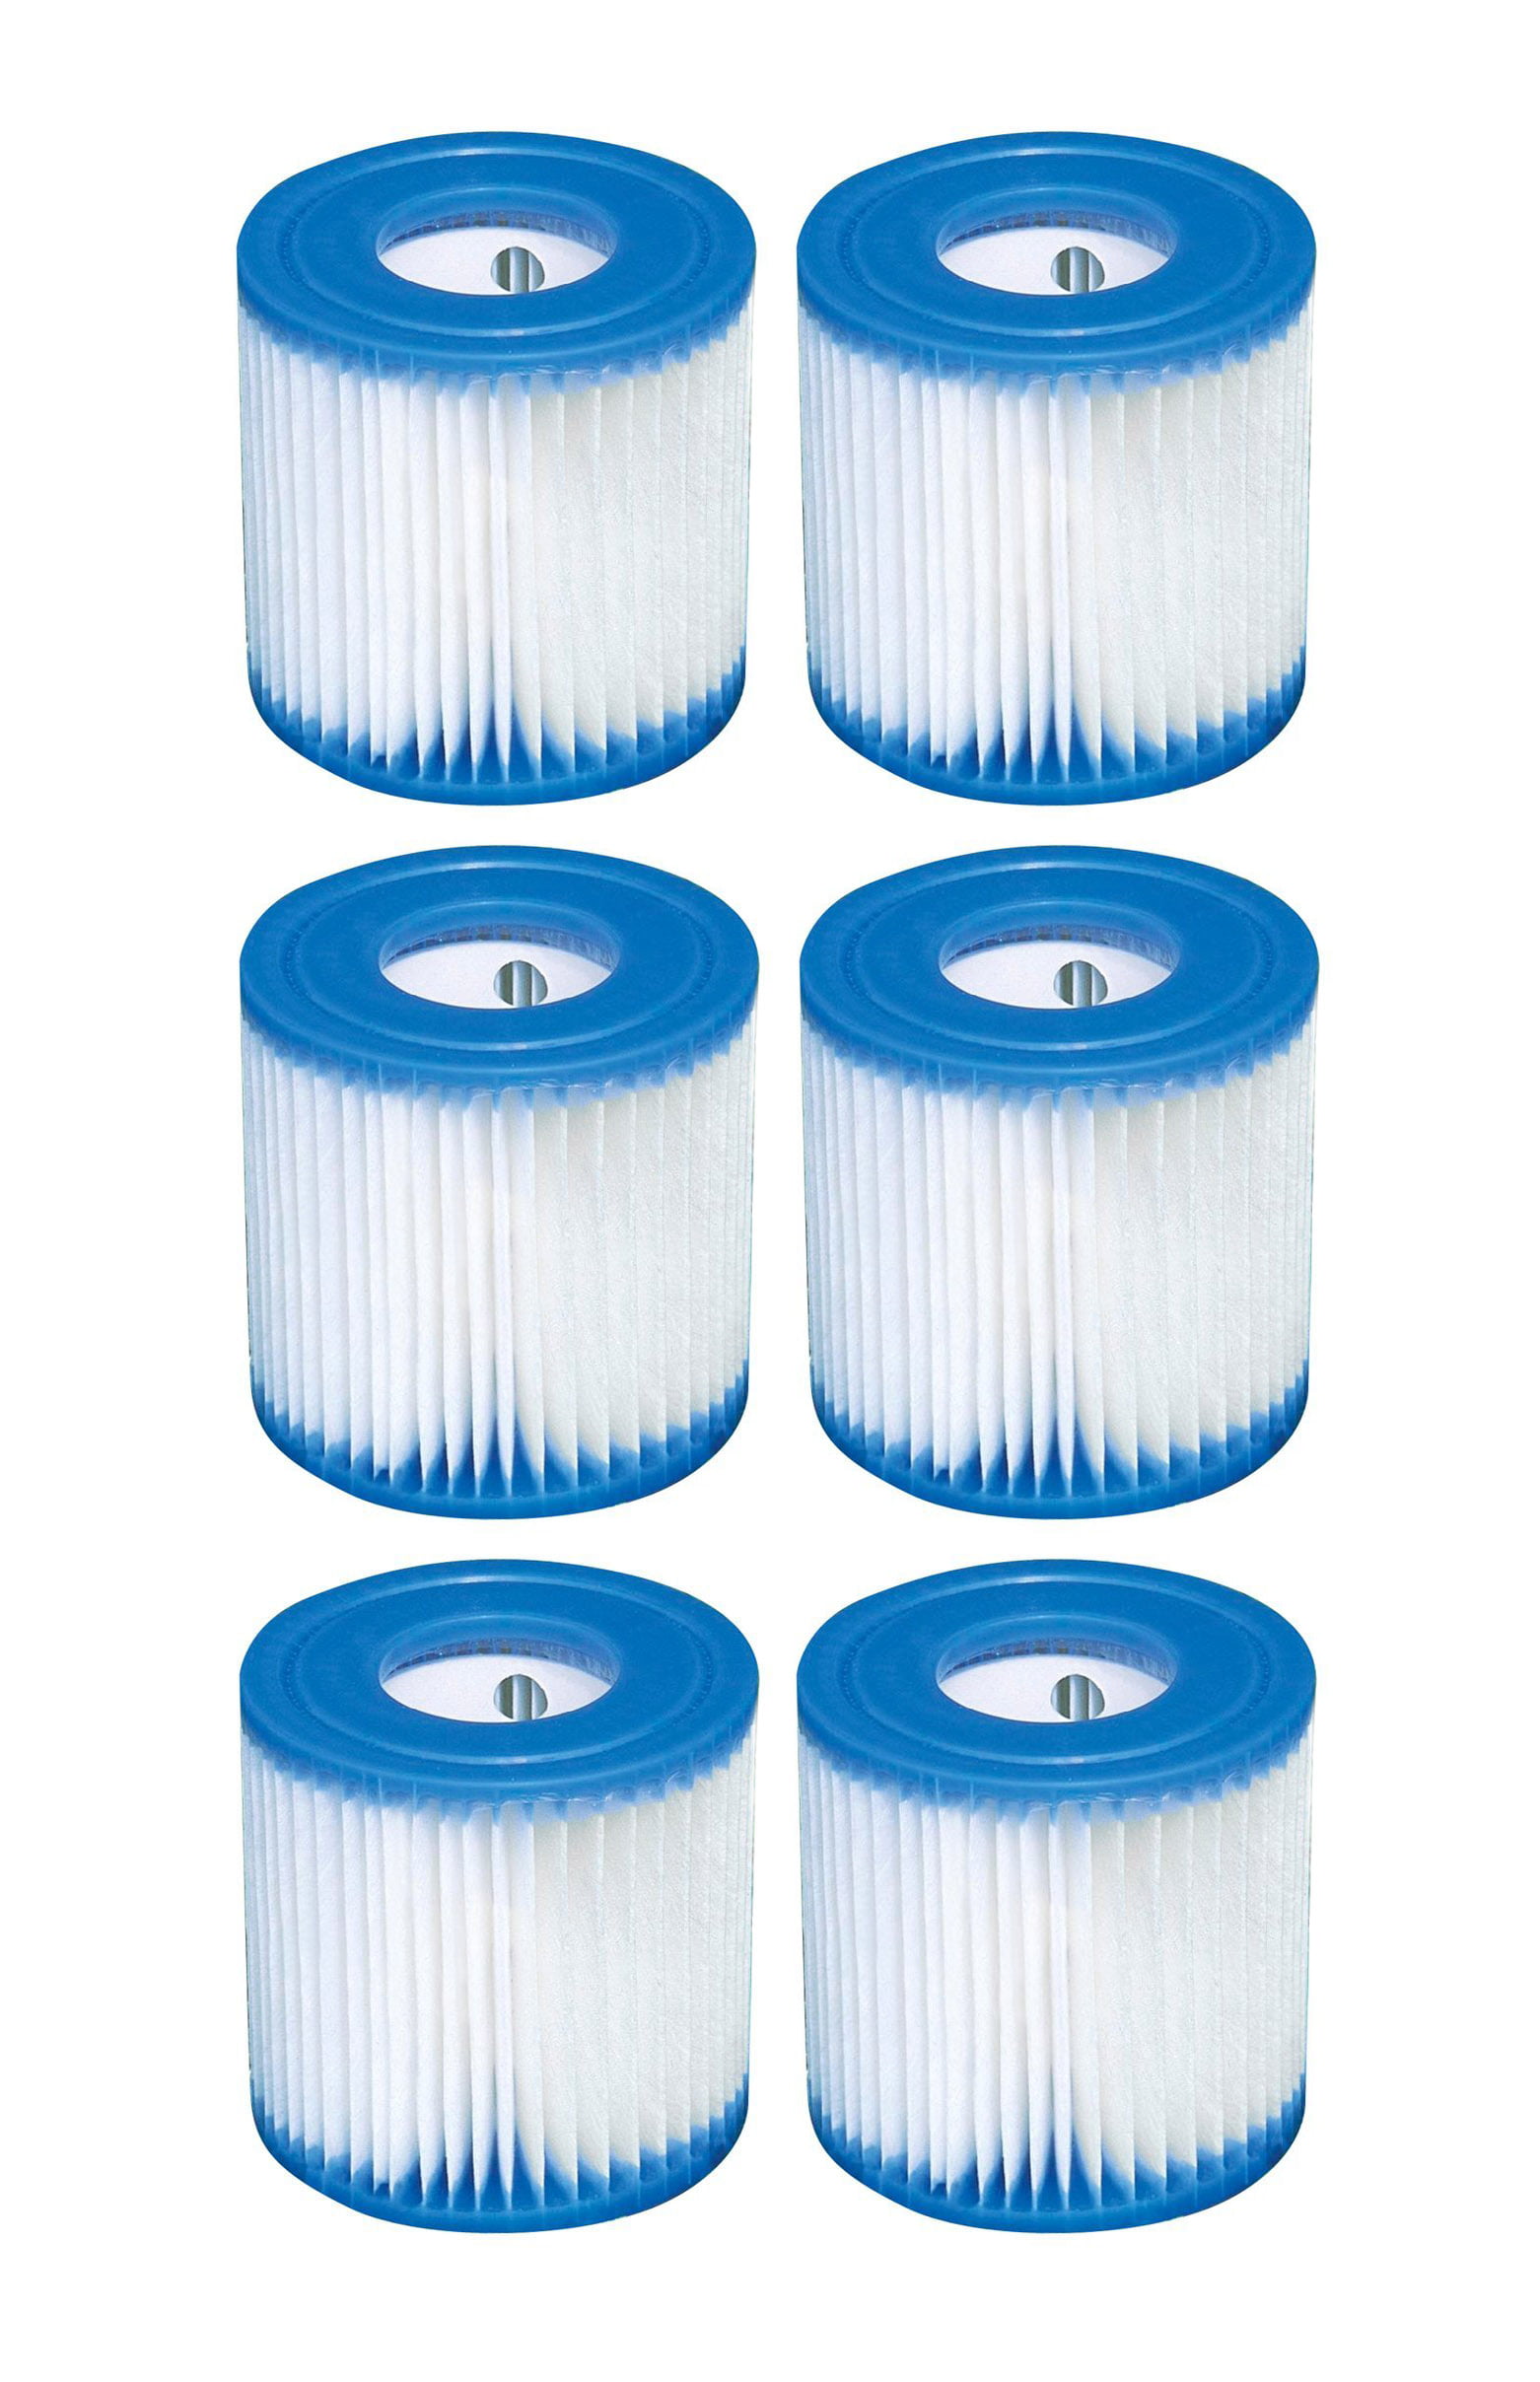 For Intex 29007E Type H Filter Cartridge For Above-Ground Swimming Pool Part 